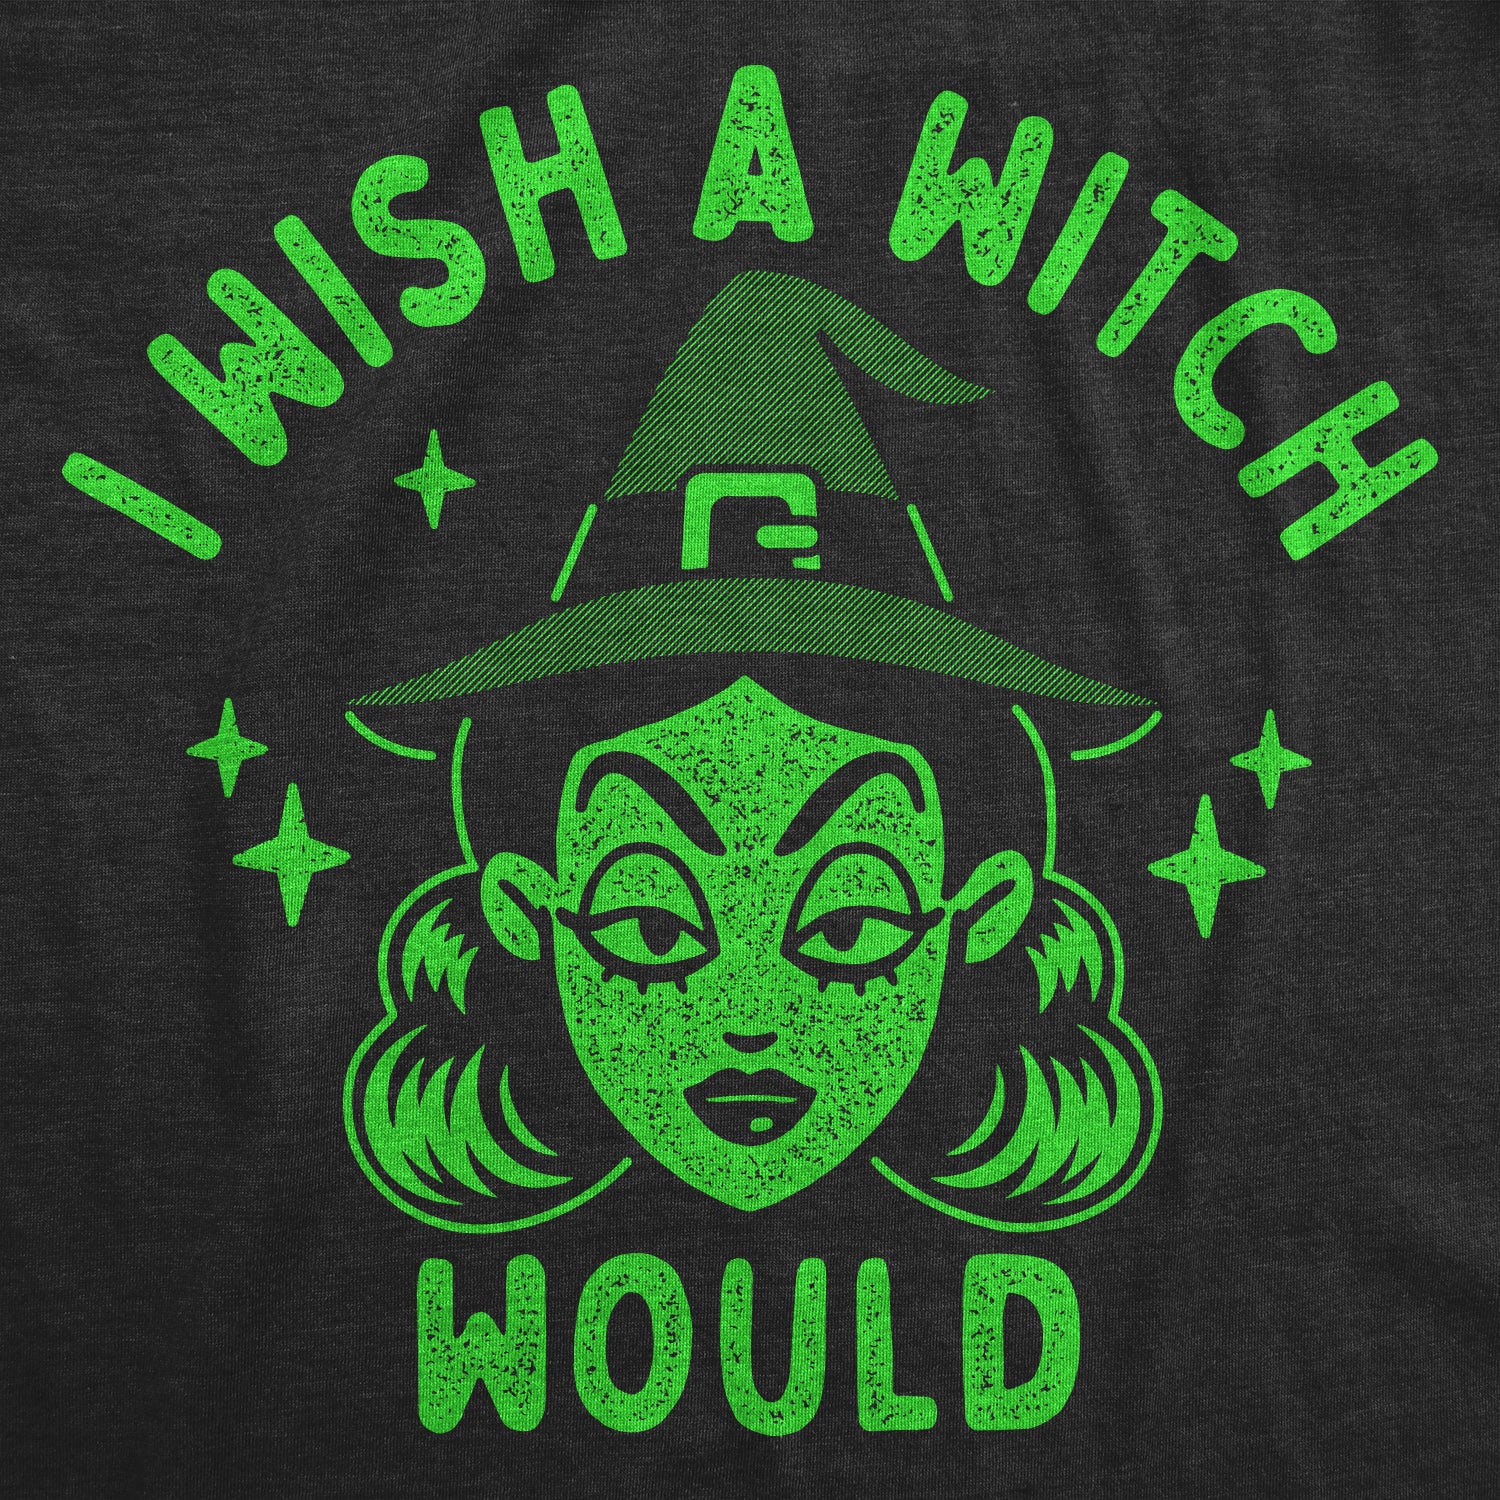 Funny Heather Black - WITCH I Wish A Witch Would Womens T Shirt Nerdy Halloween Sarcastic Tee